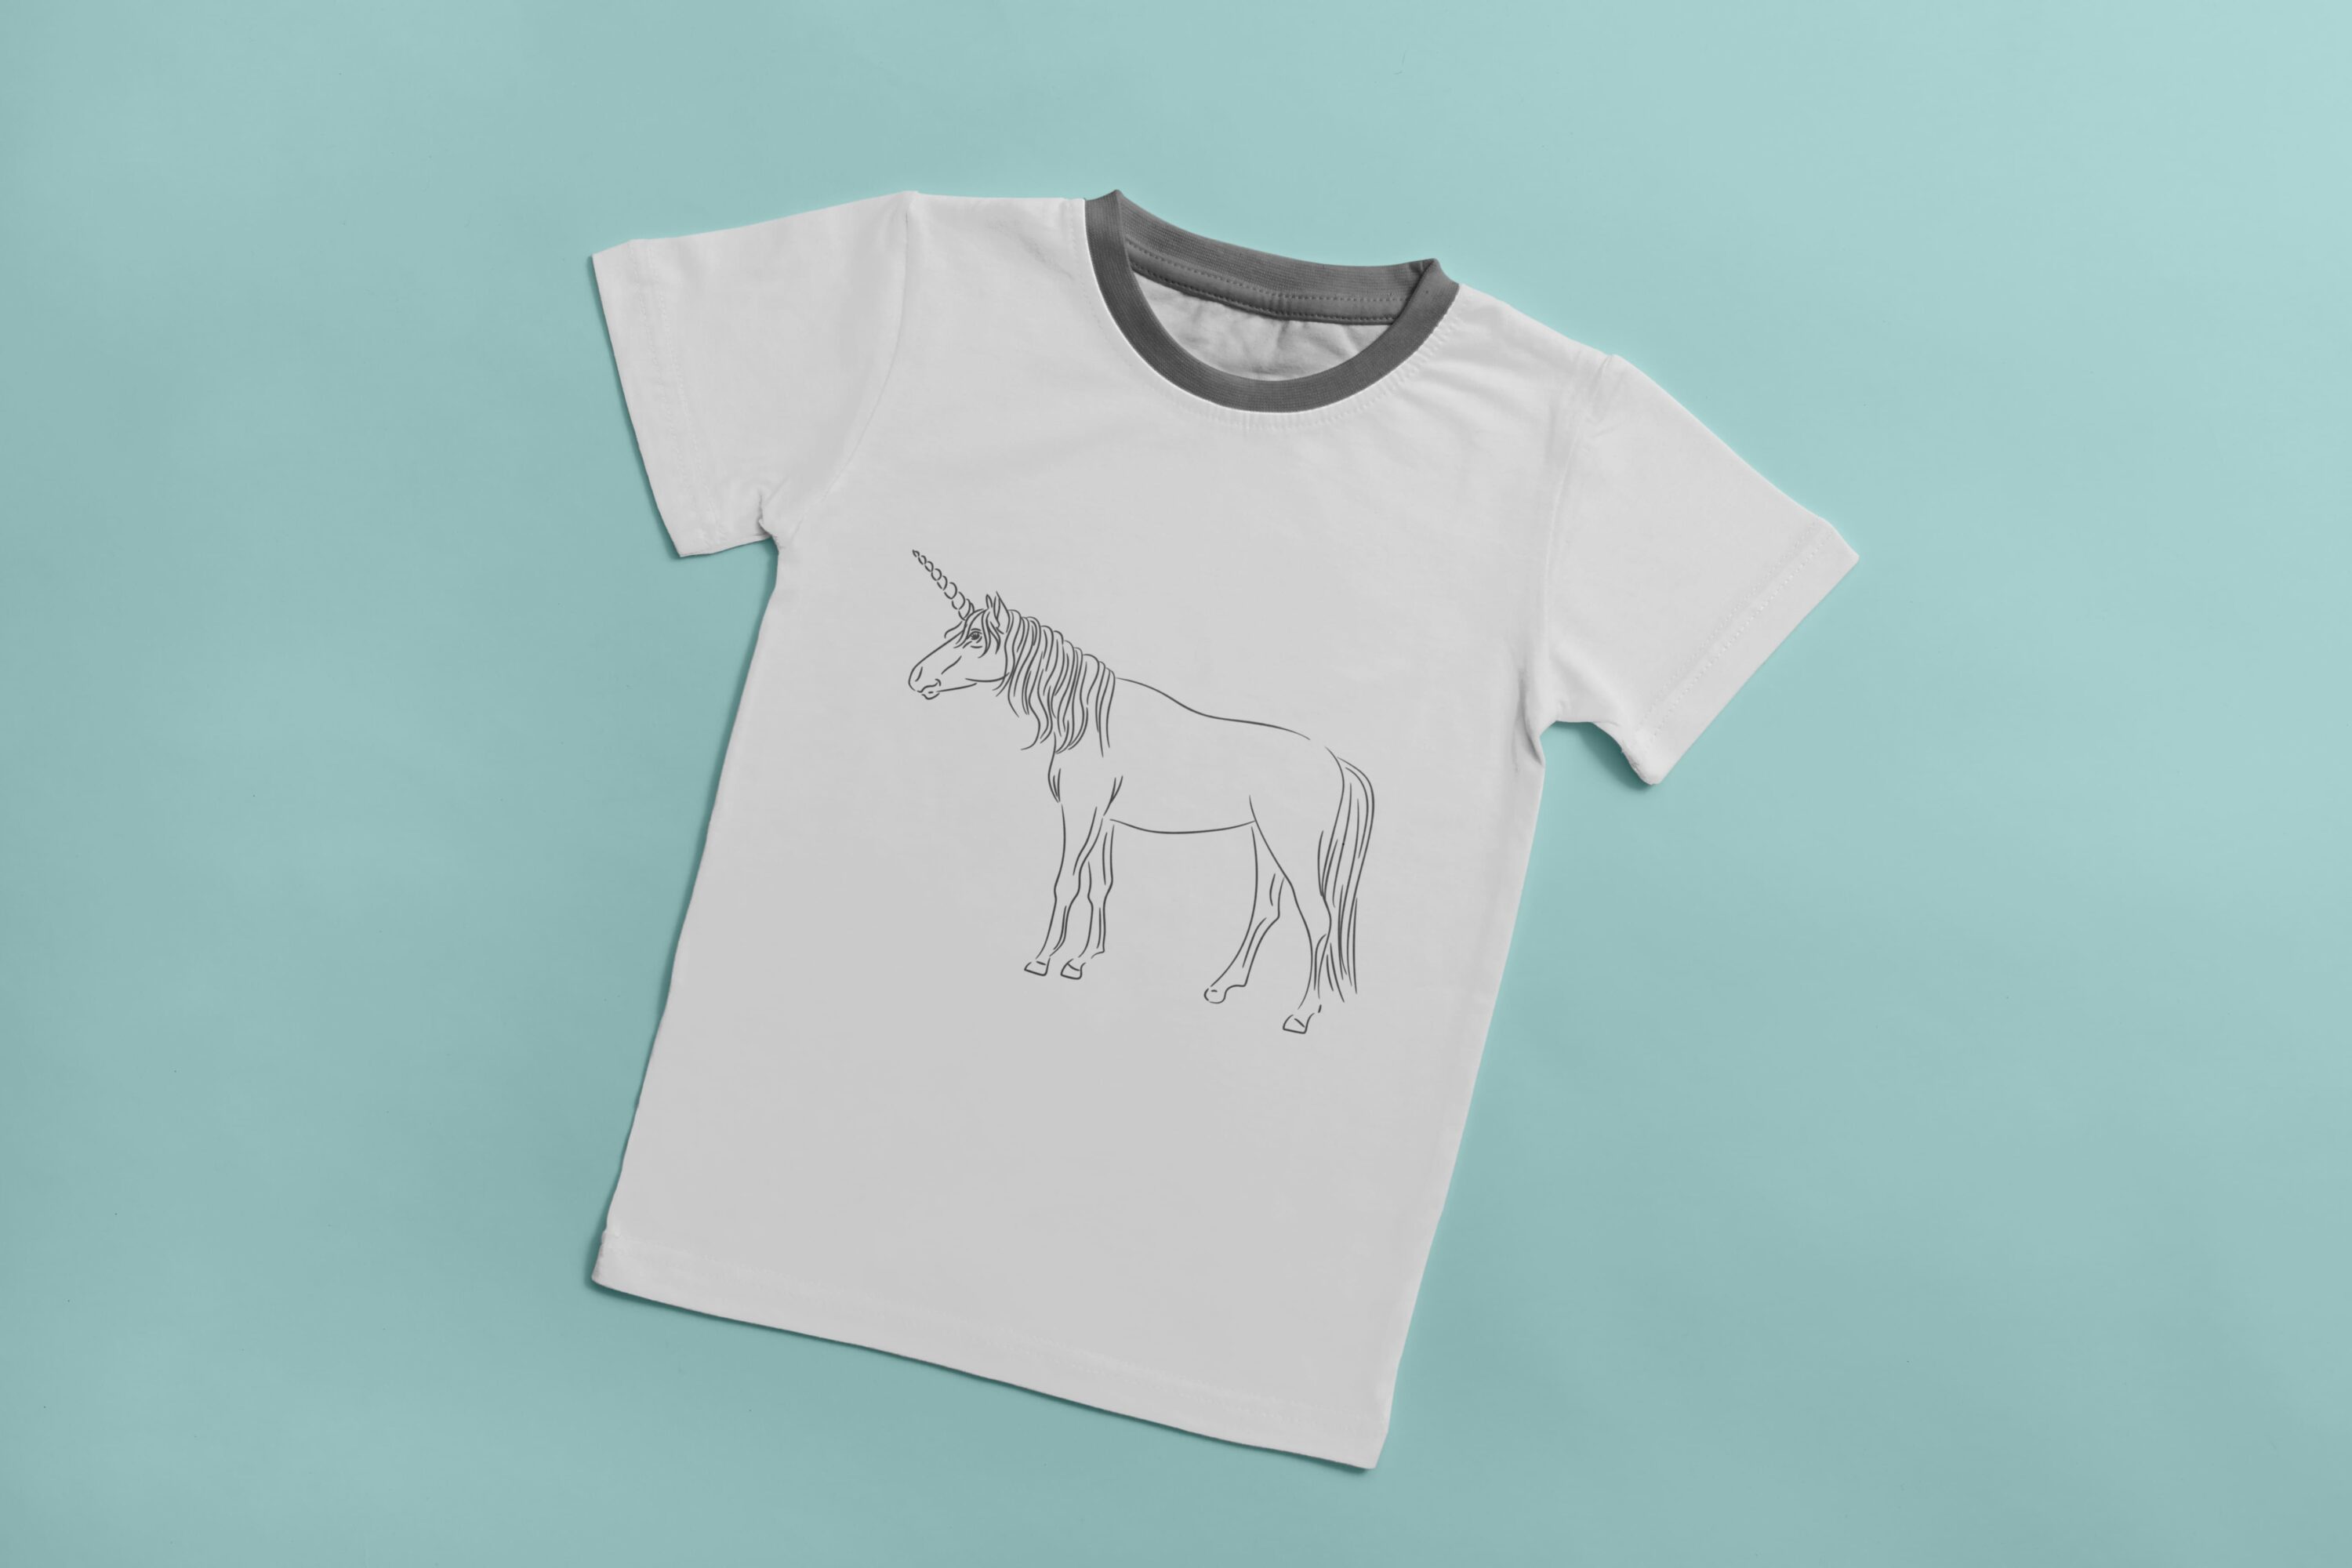 White t-shirt with a gray collar and a gray silhouette of a unicorn on a light blue background.